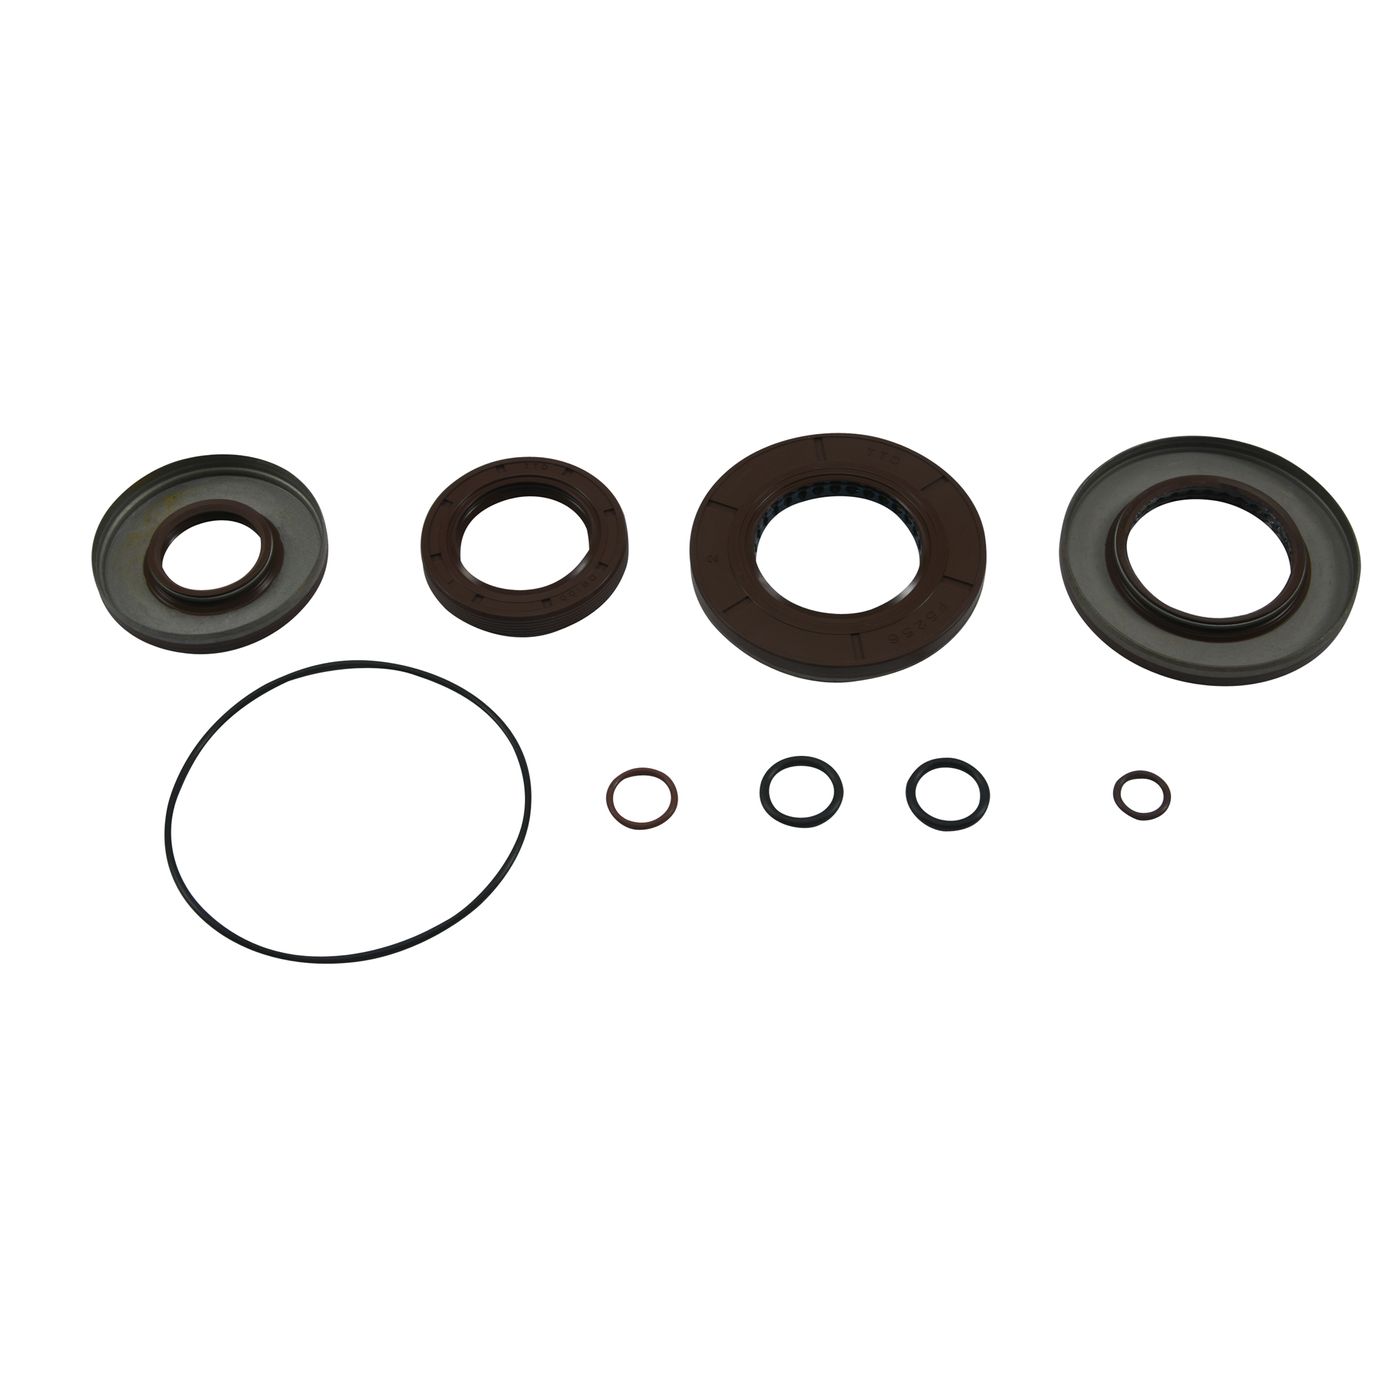 Wrp Diff Seal Kits - WRP252114-5 image